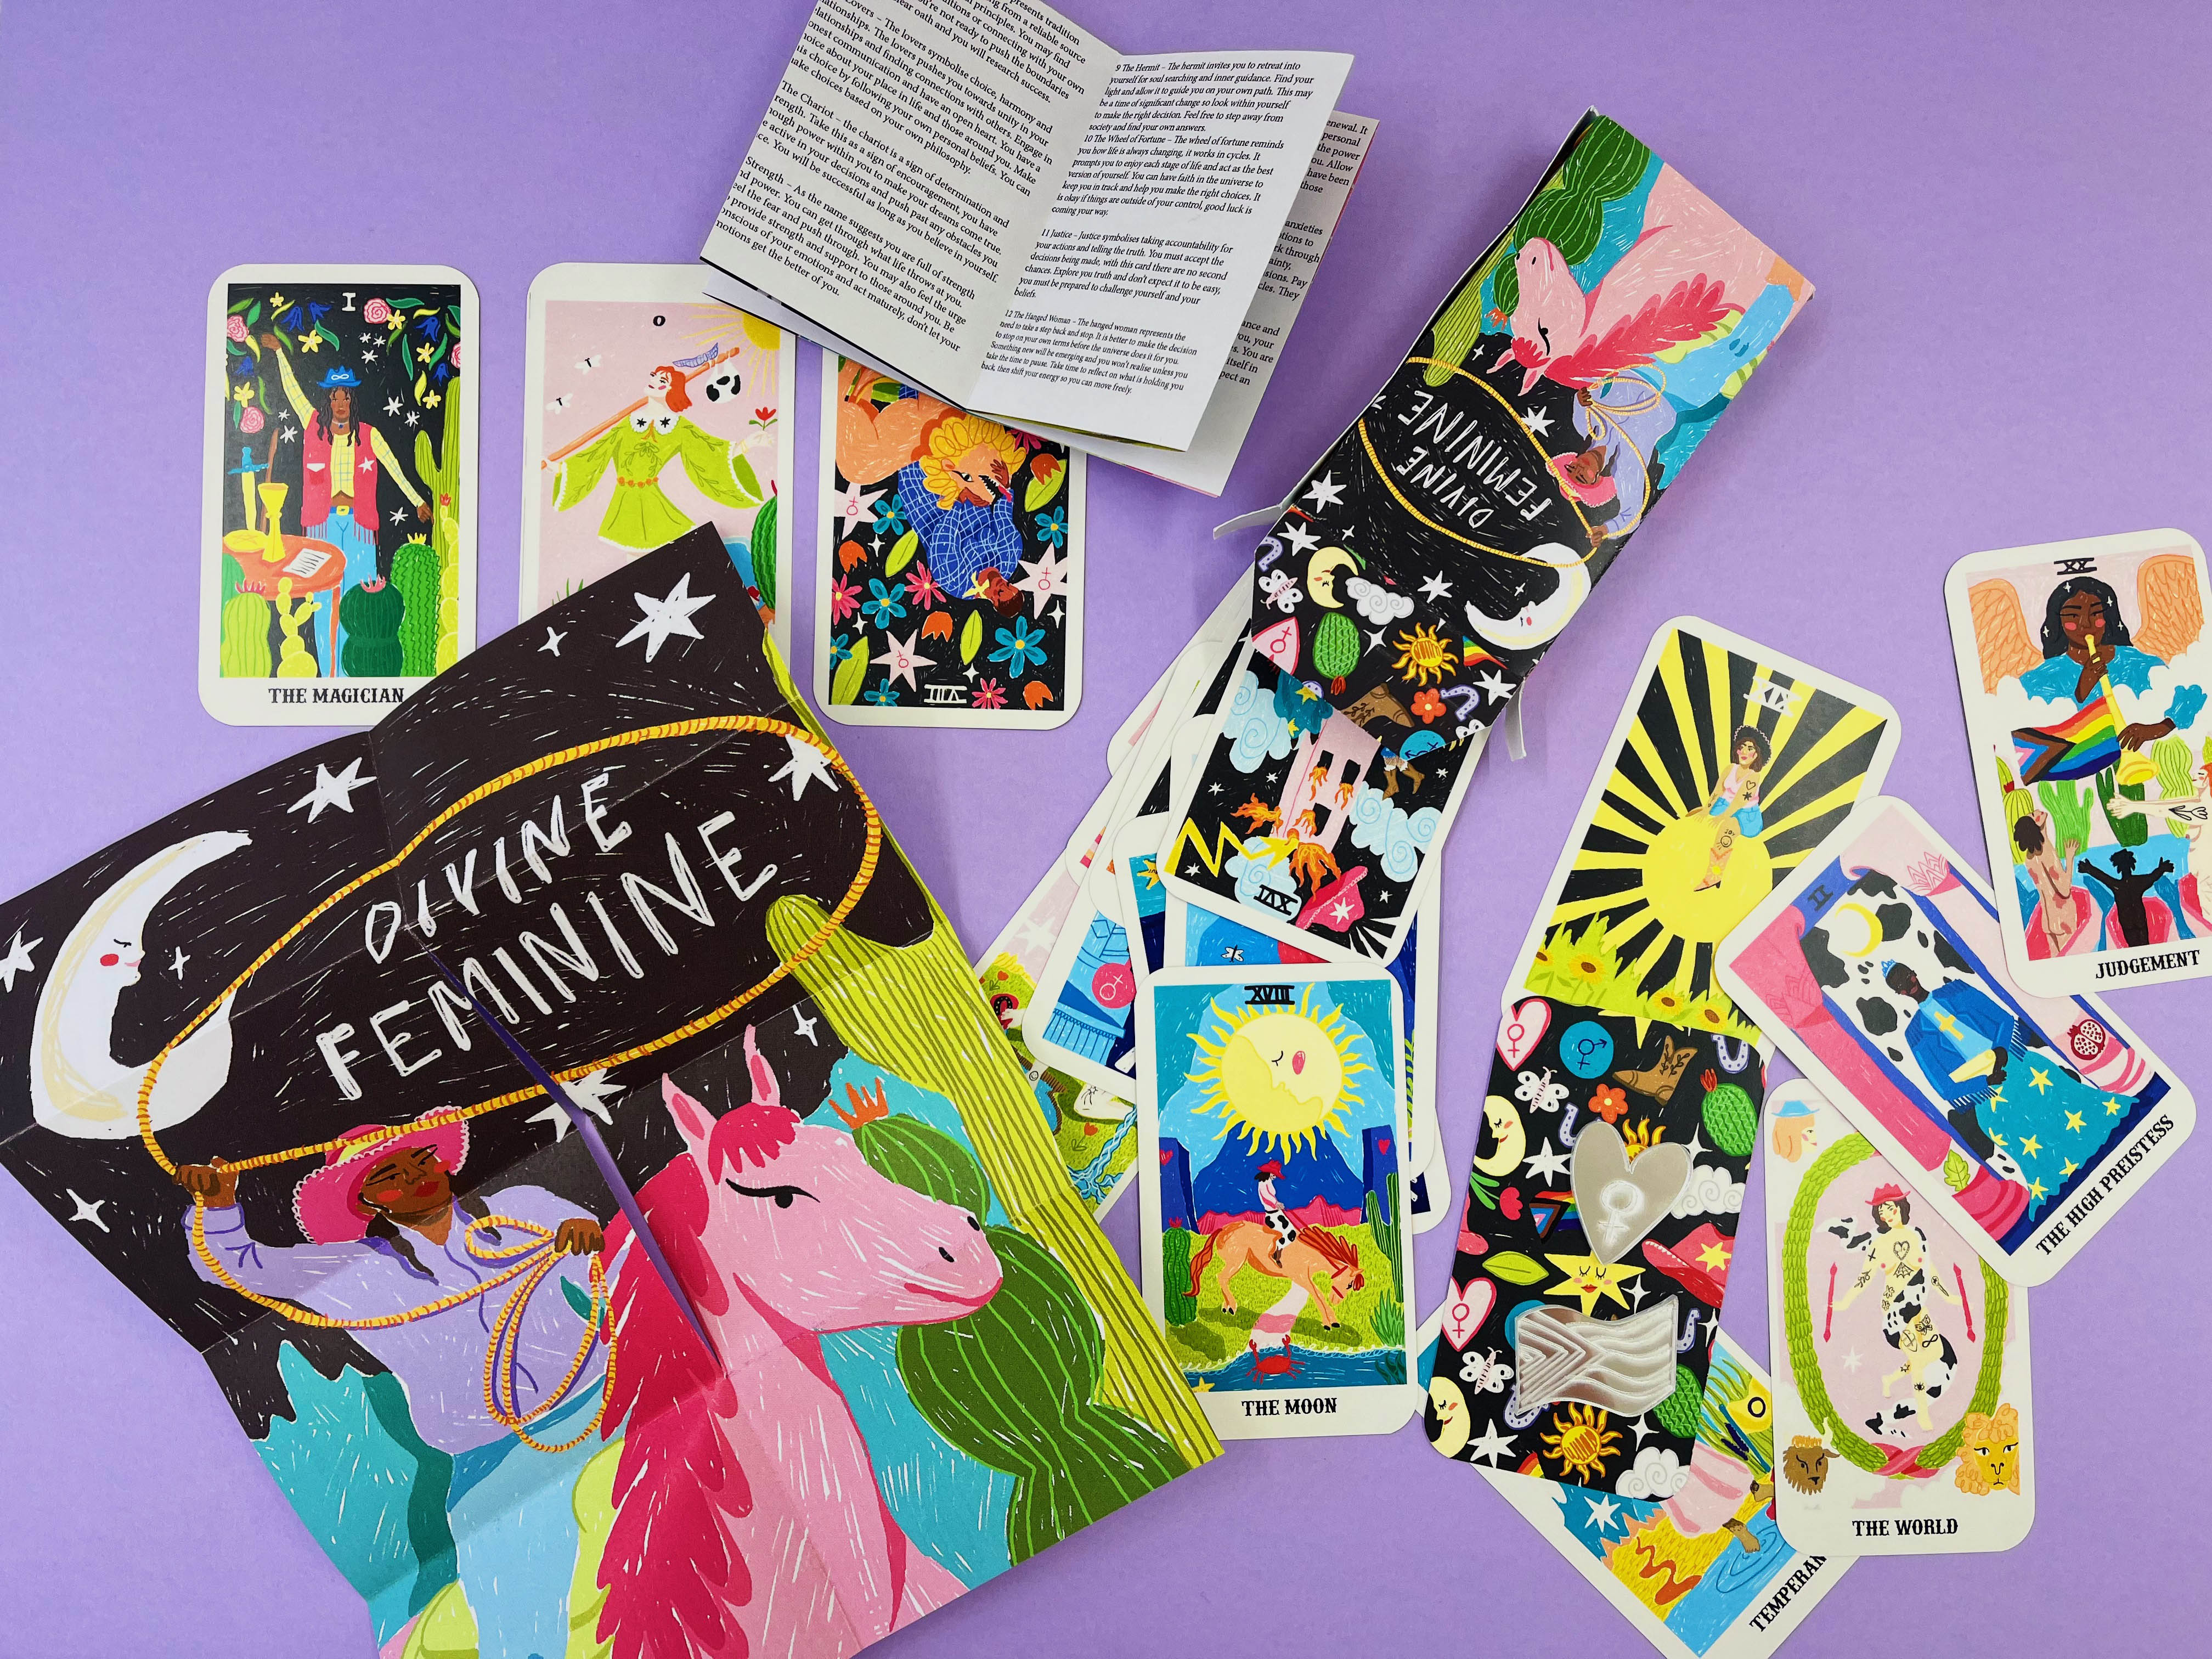 BA Illustration work by Emily Foster showing an illustrated tarot deck, the box, a booklet and a pin badge on a purple background.